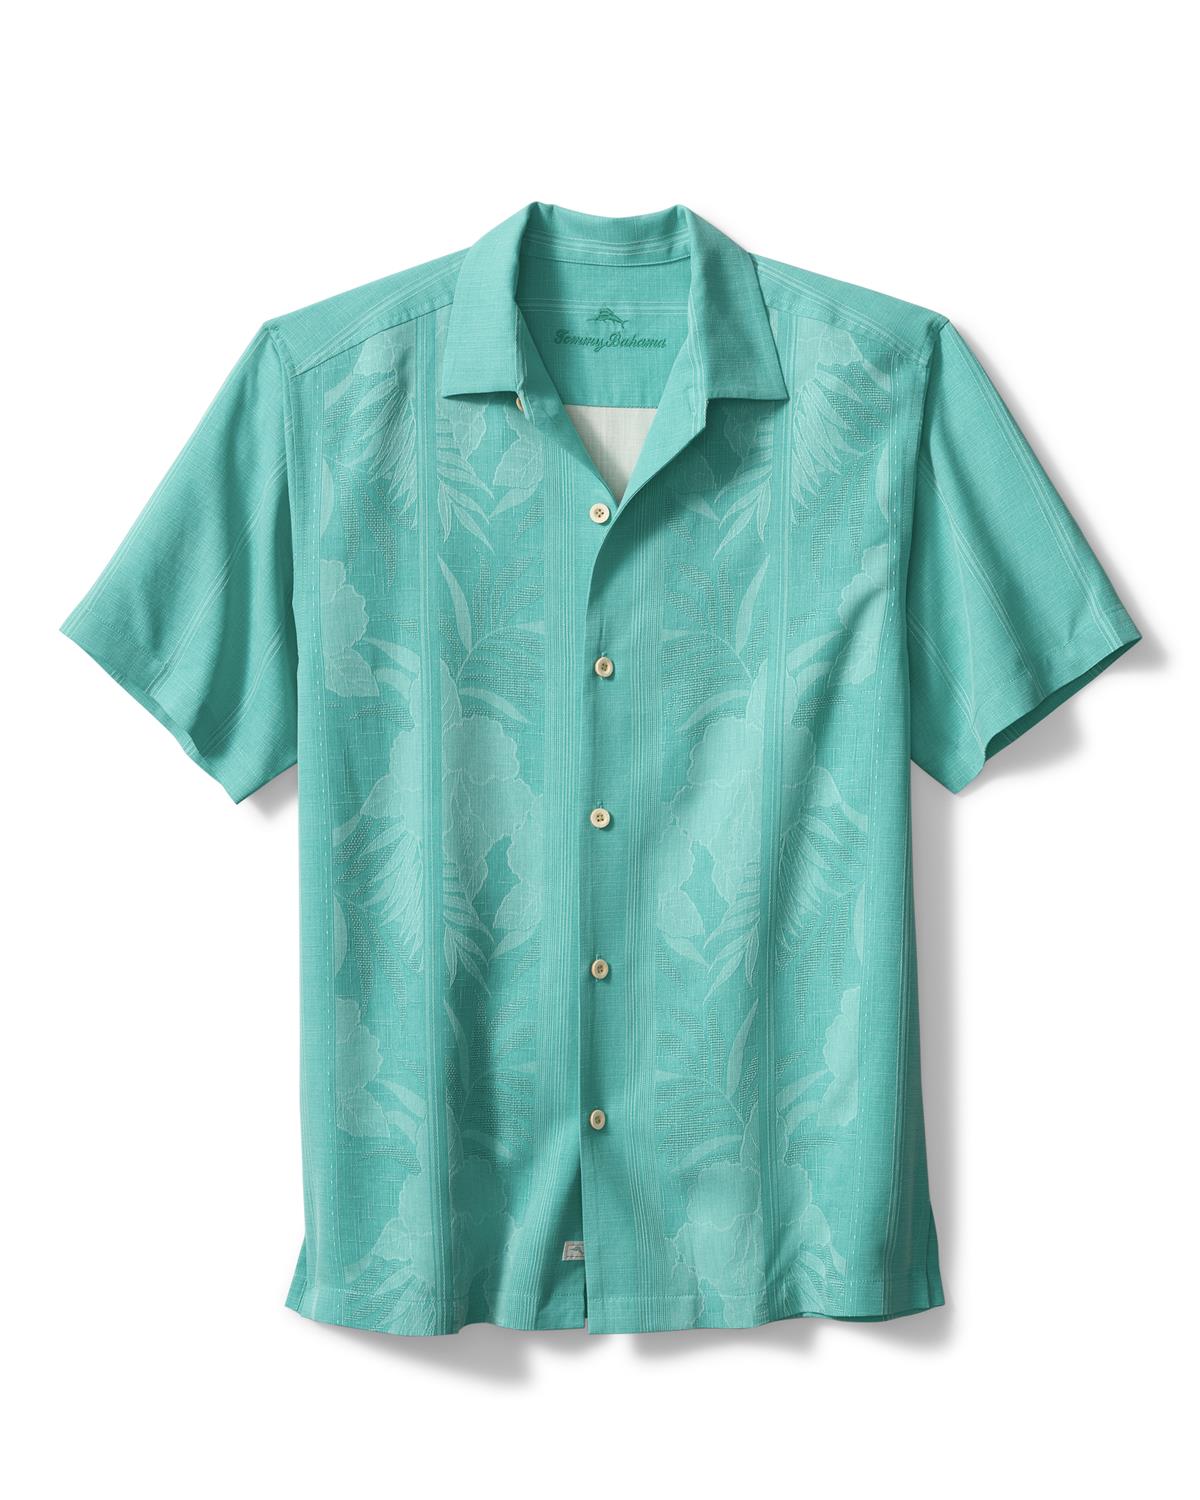 Tommy Bahama Men's White Los Angeles Dodgers Sport Tropic Isles Camp  Button-Up Shirt - Macy's